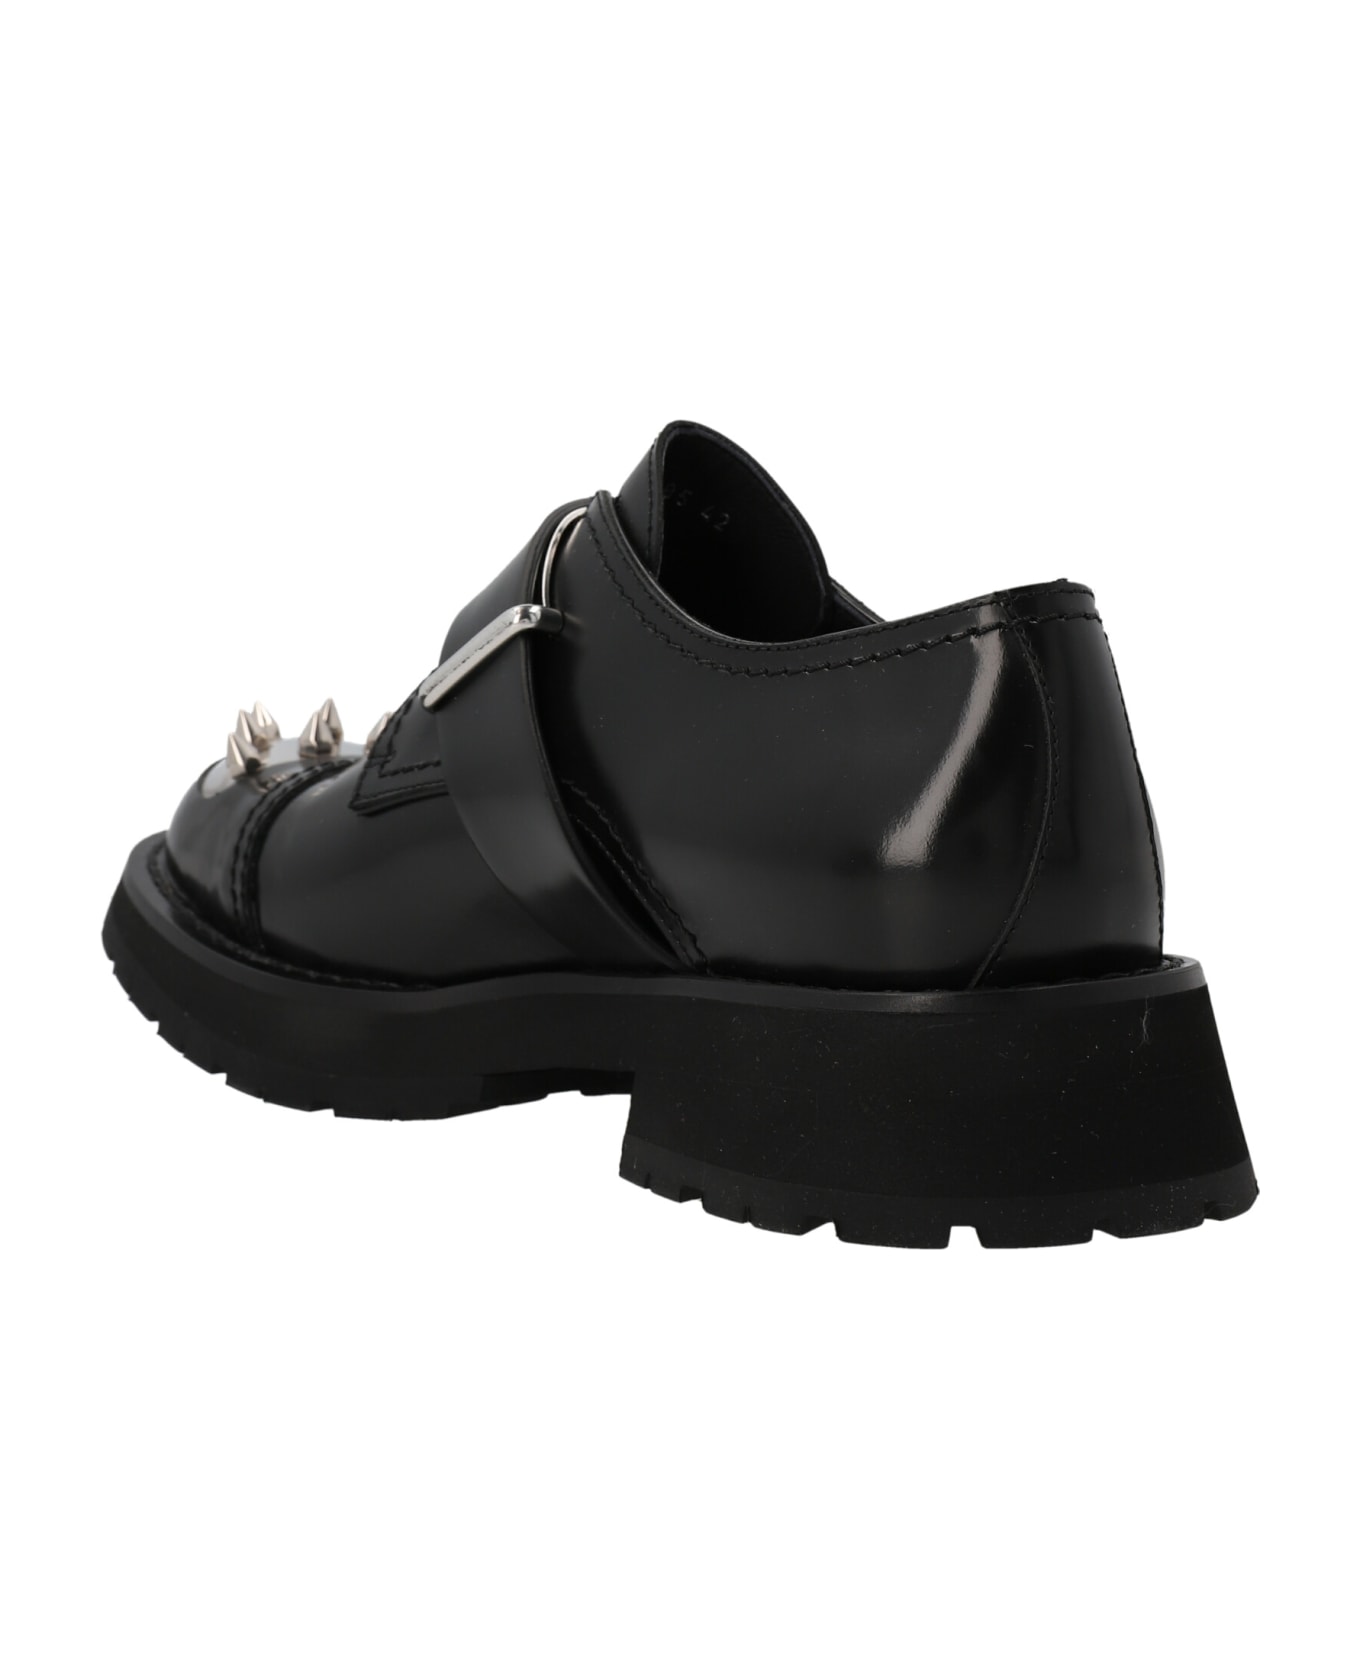 Alexander McQueen Studded Derby Shoes right - Black  